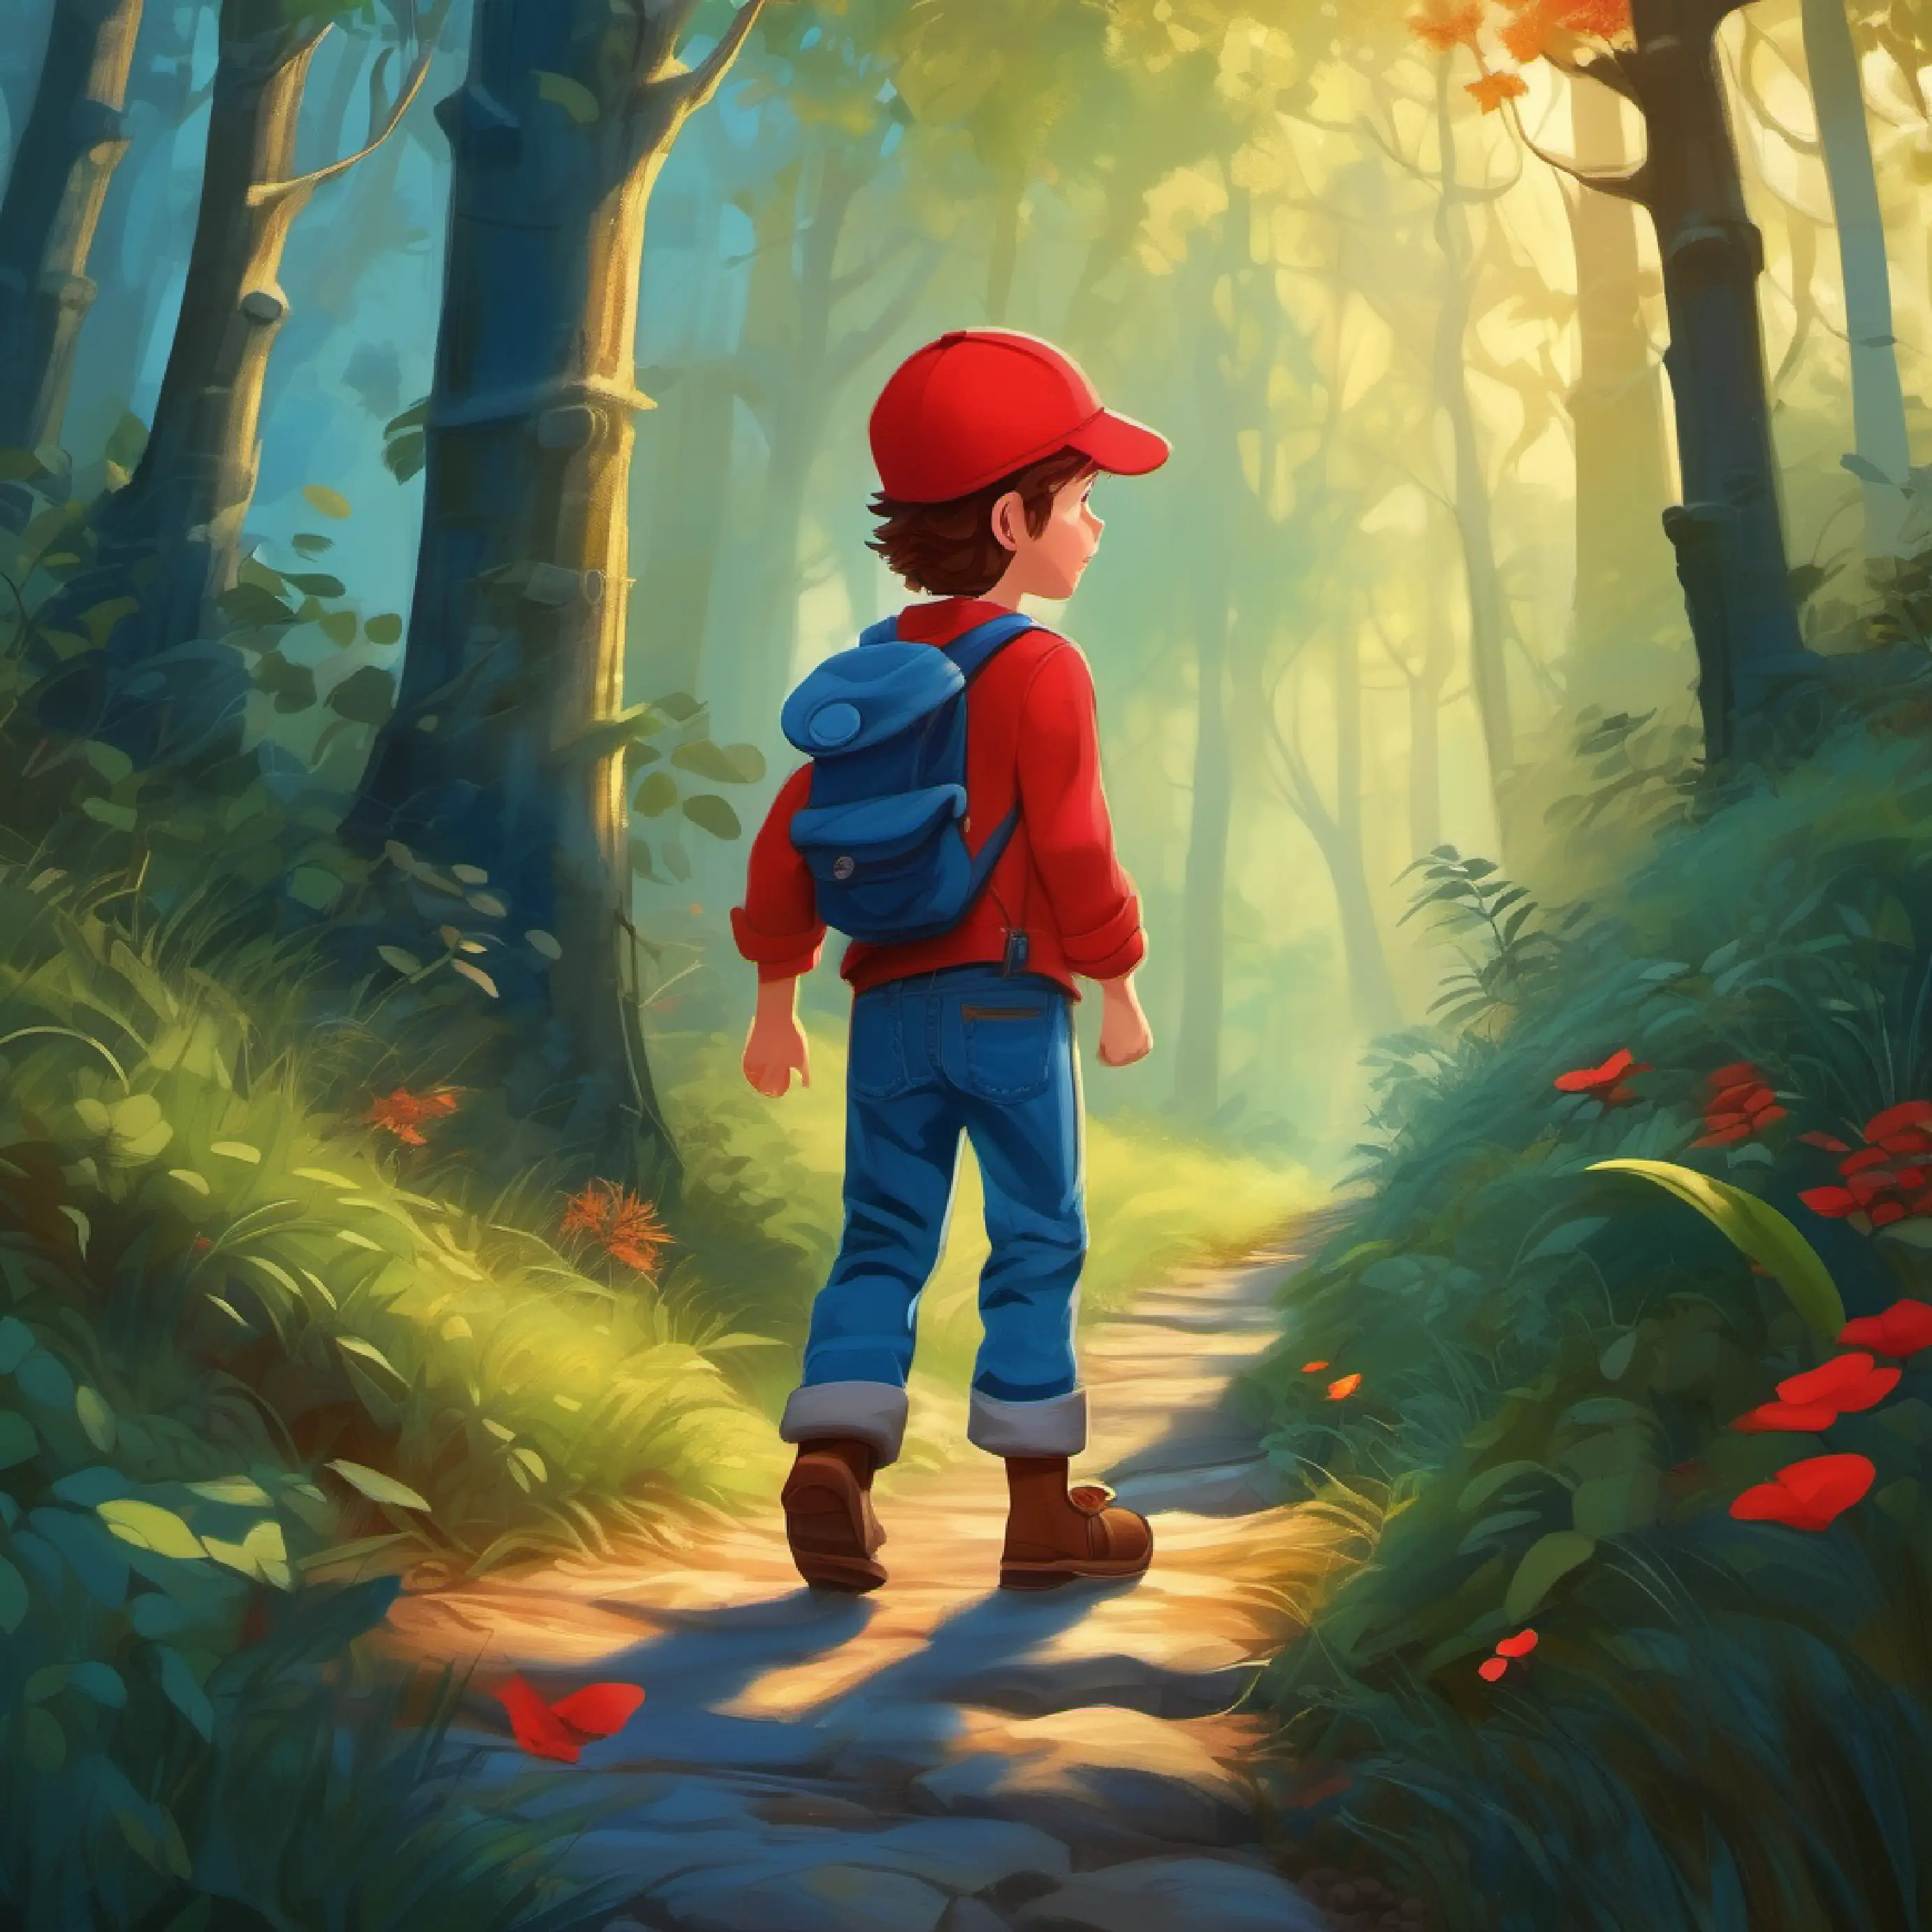 Brave boy, red cap, loves to explore, wears blue jeans enters the mysterious woods, sees footprints